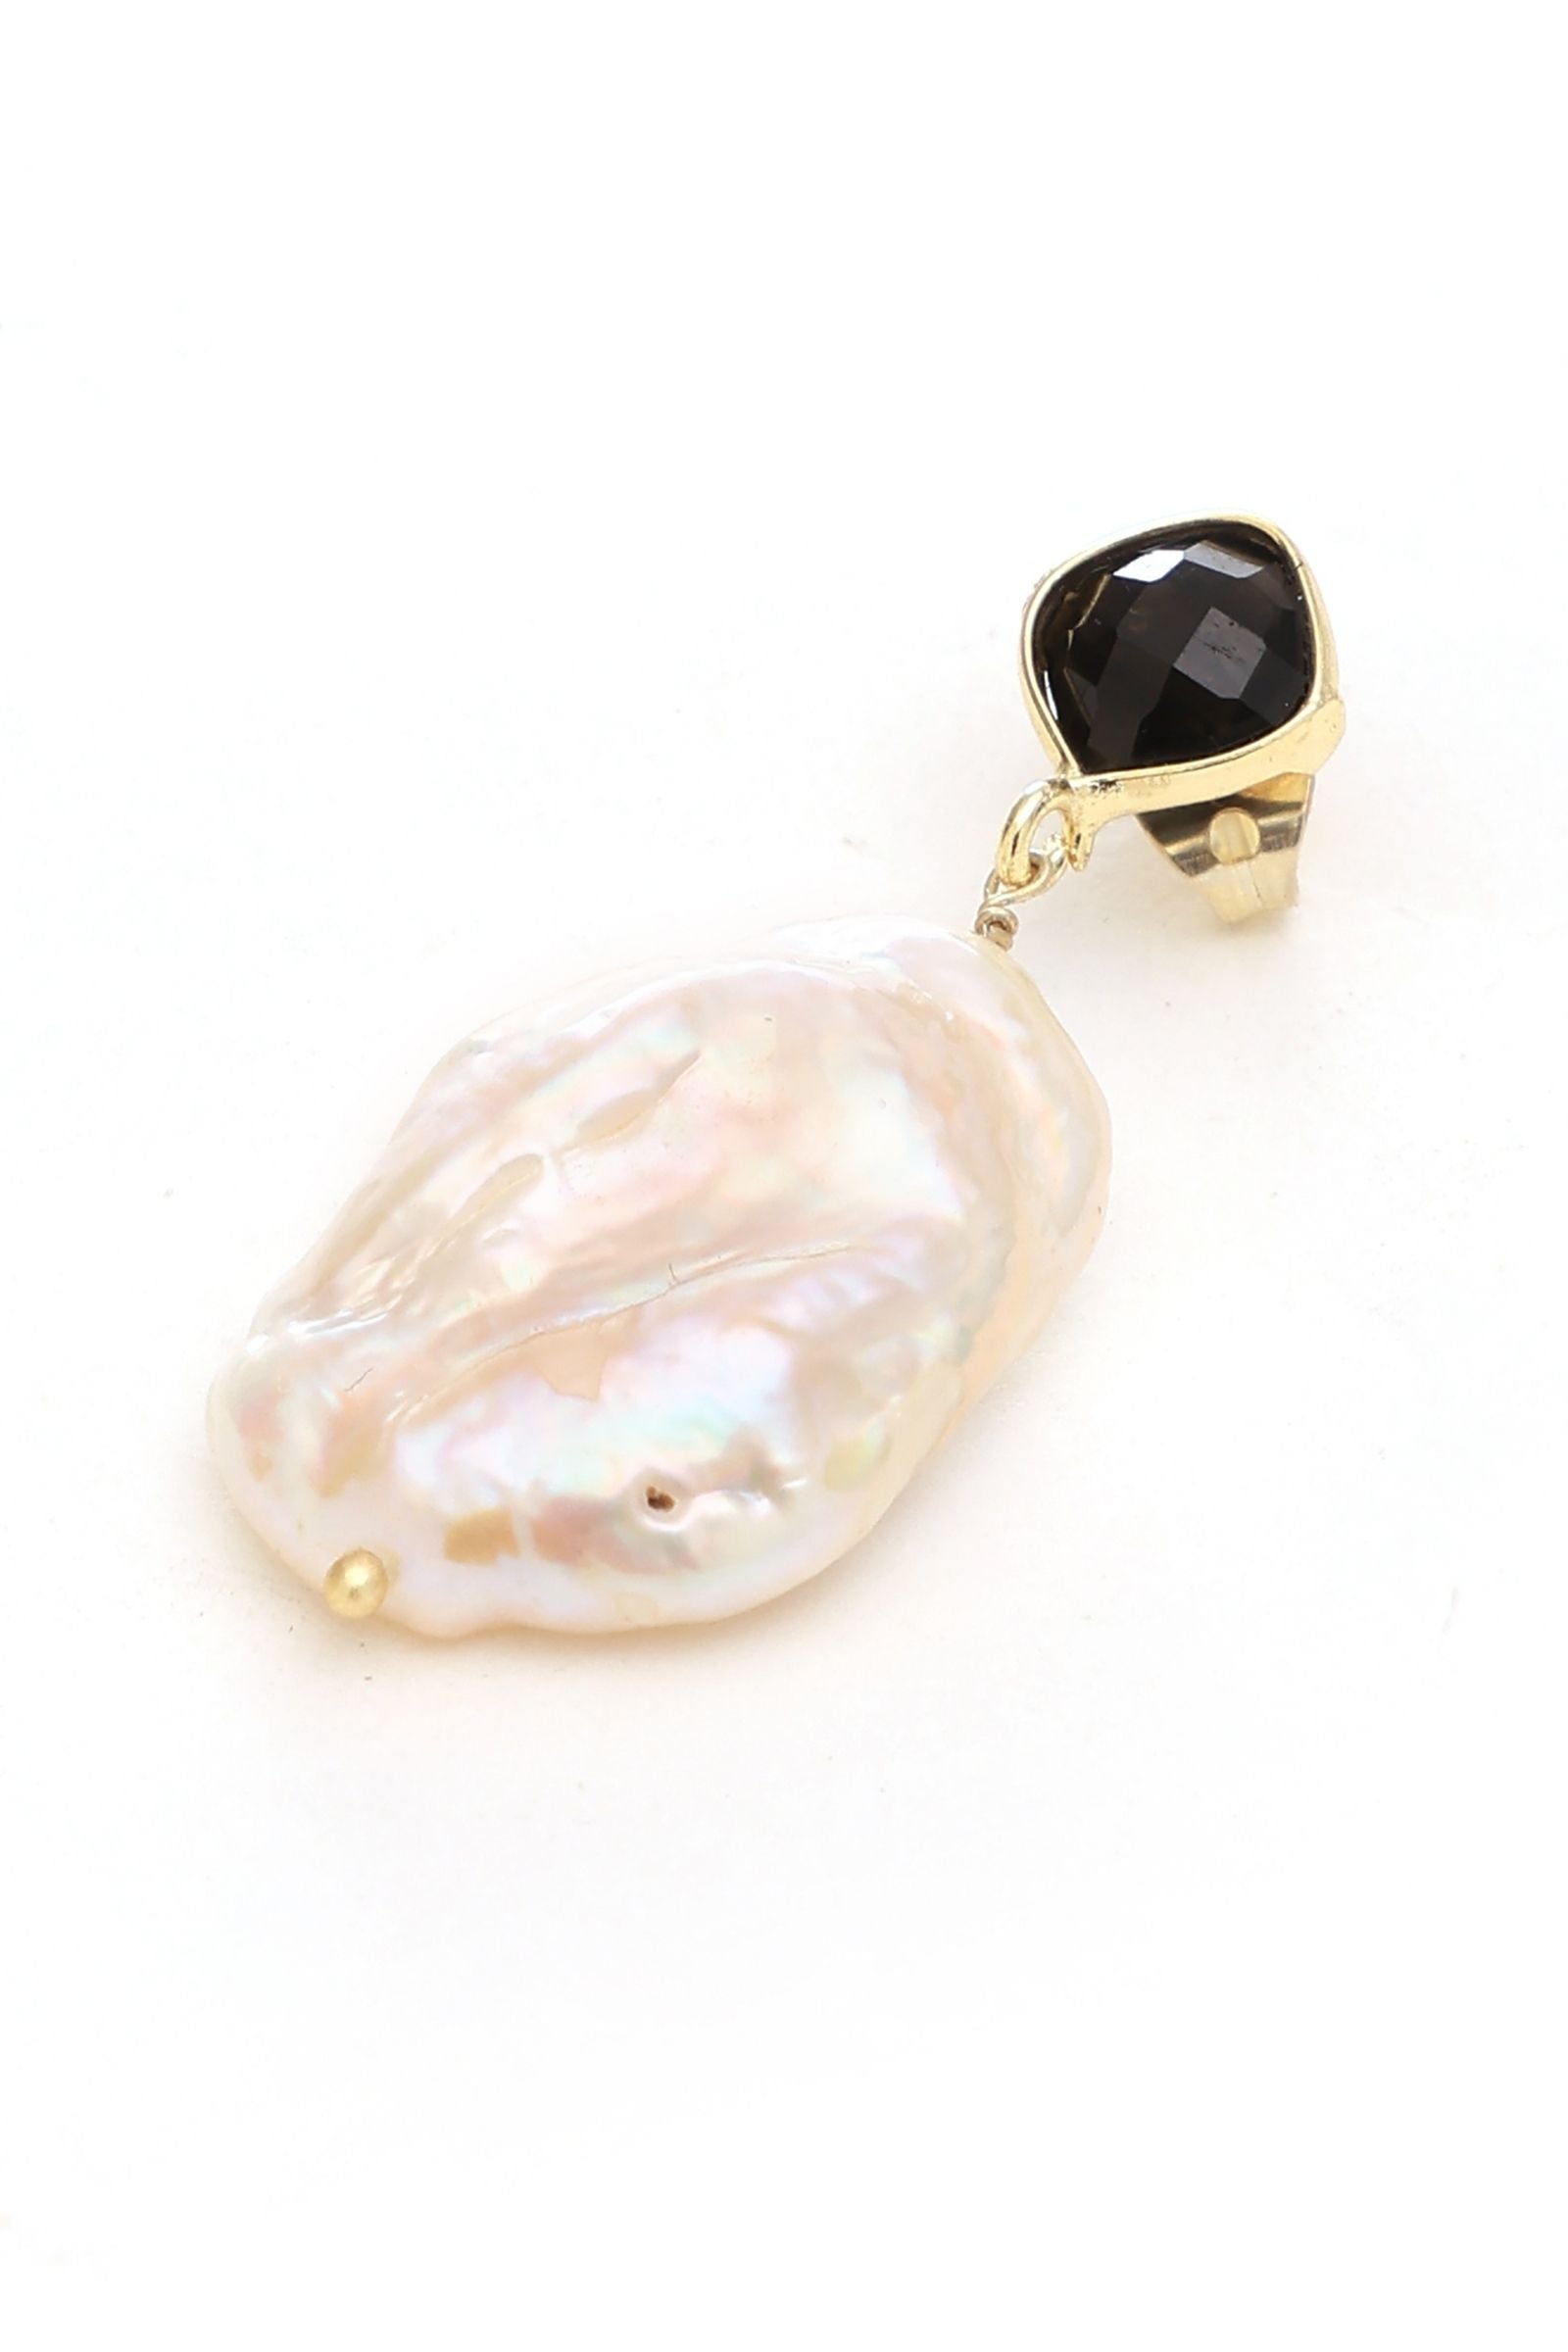 Black Onyx with Pearl Drop Earring